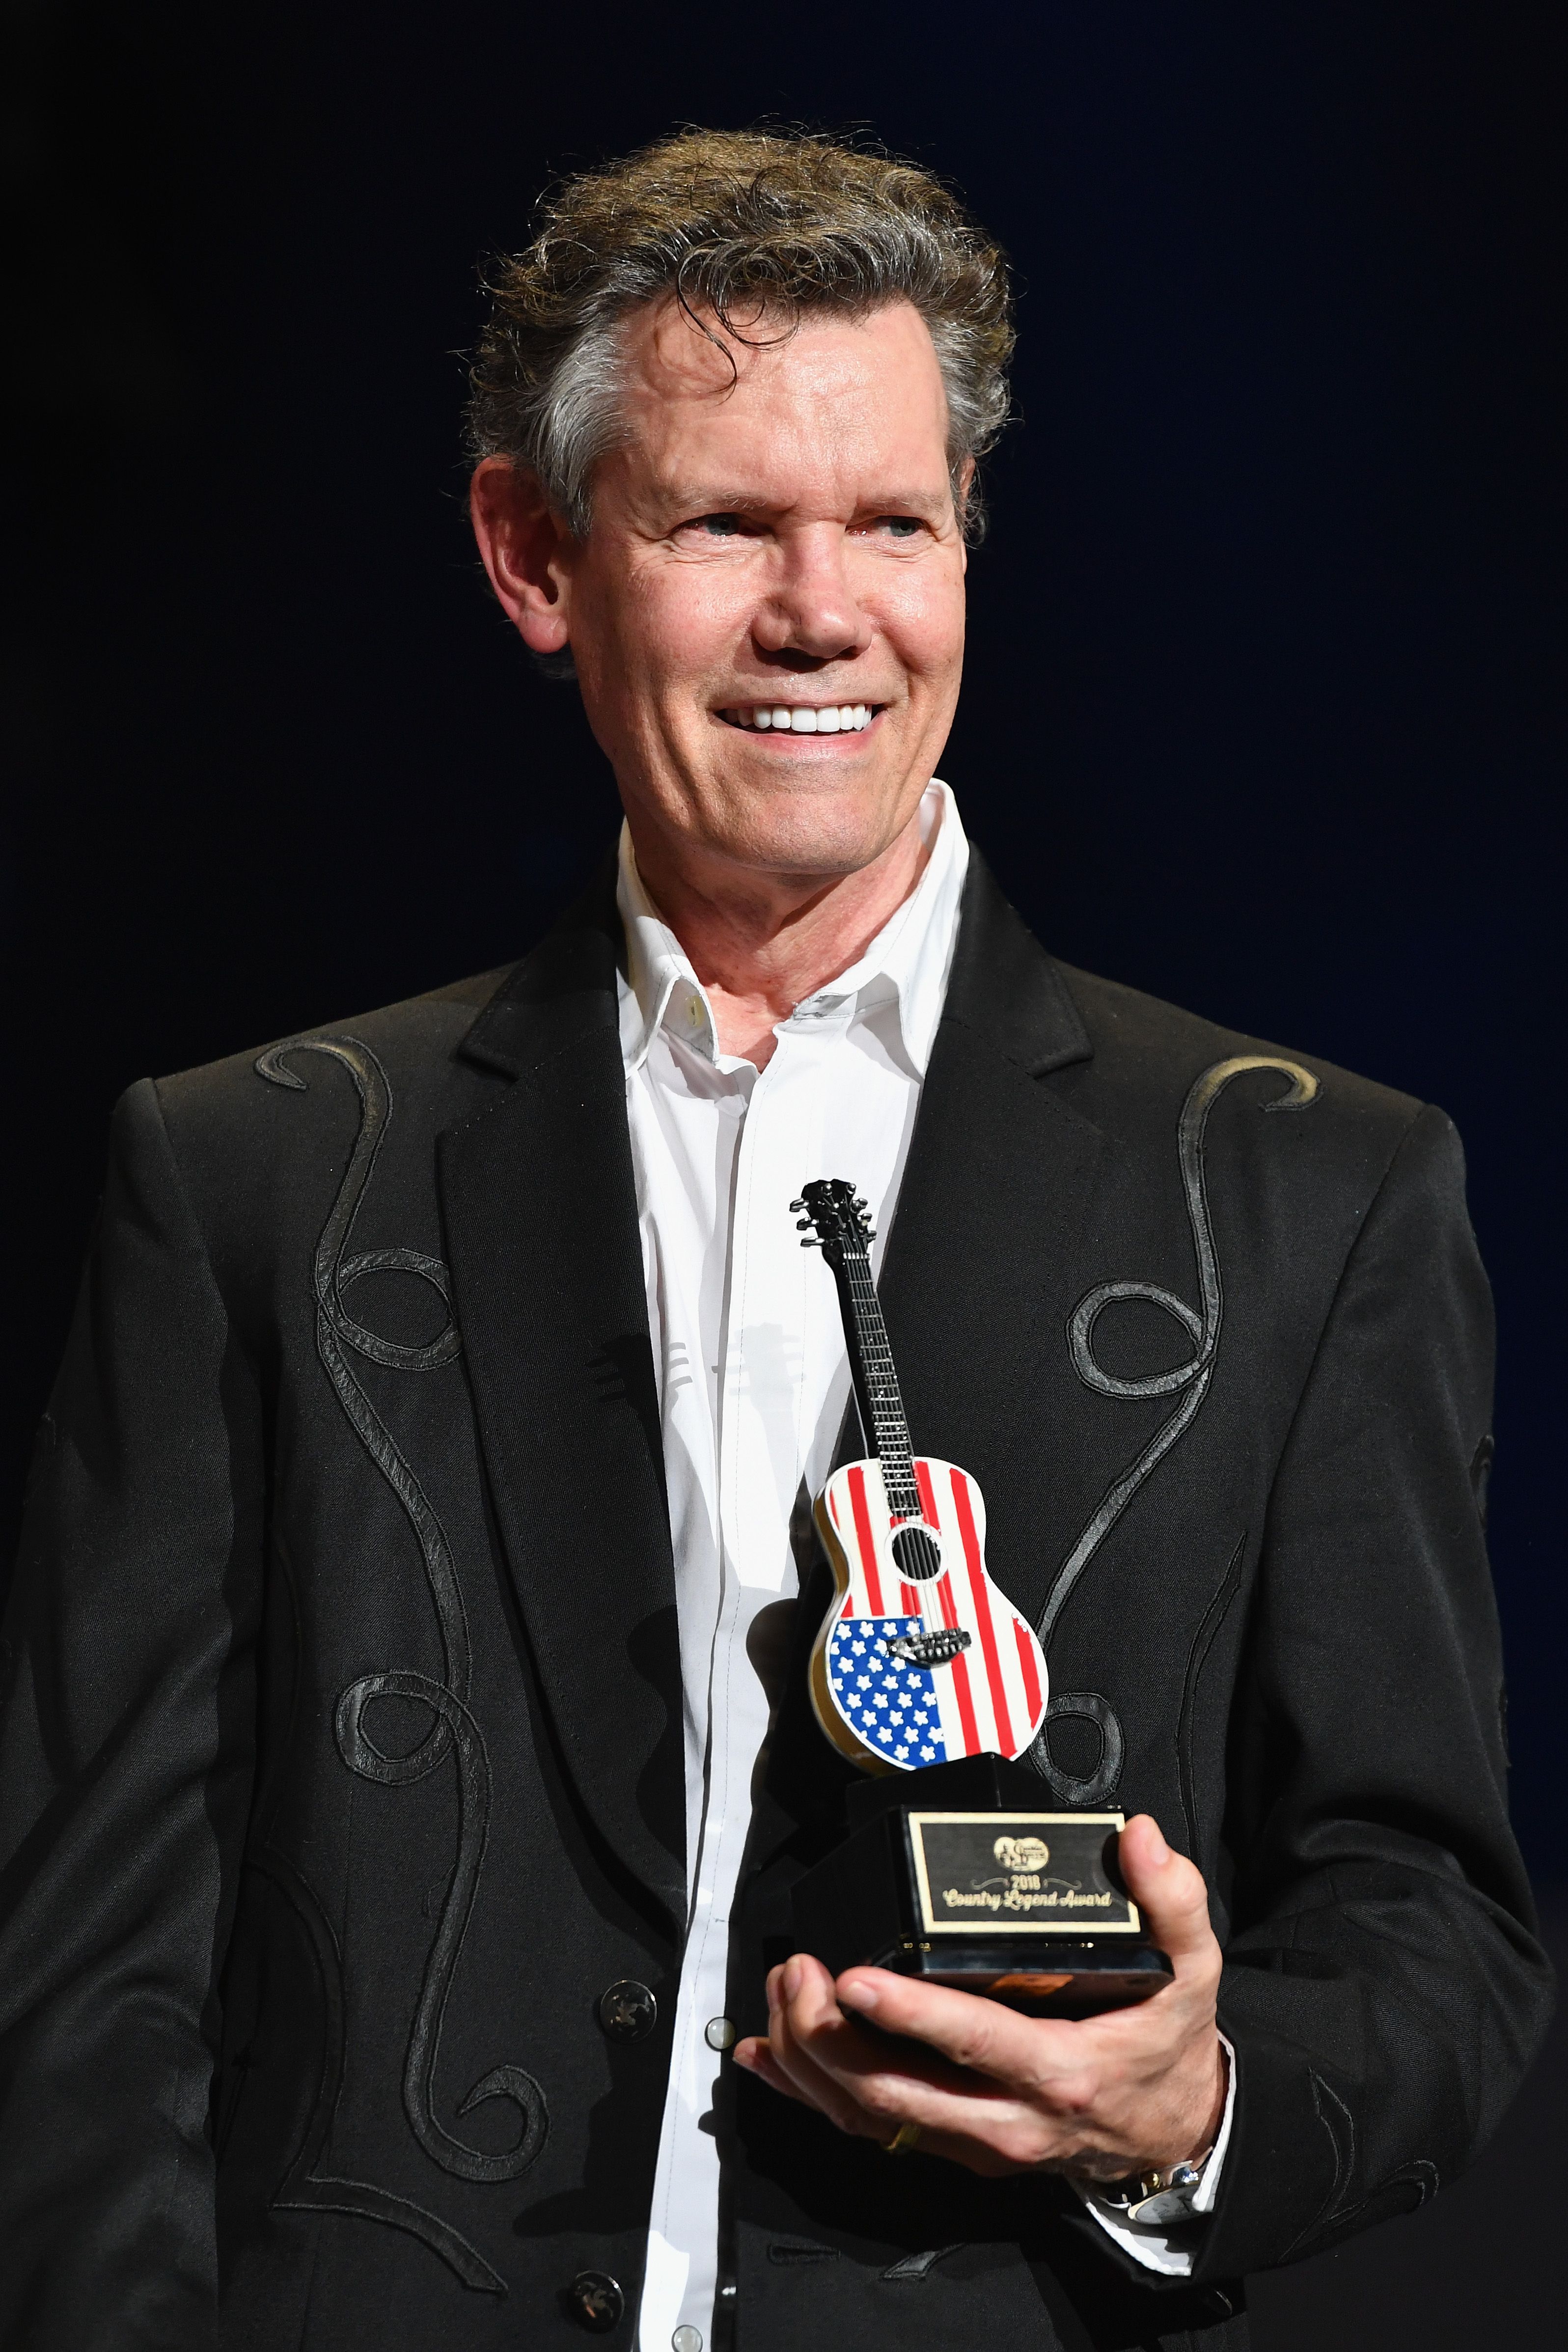 Randy Travis receives an award during the CMA Music Festival on June 9, 2018, in Nashville. | Photo: Getty Images